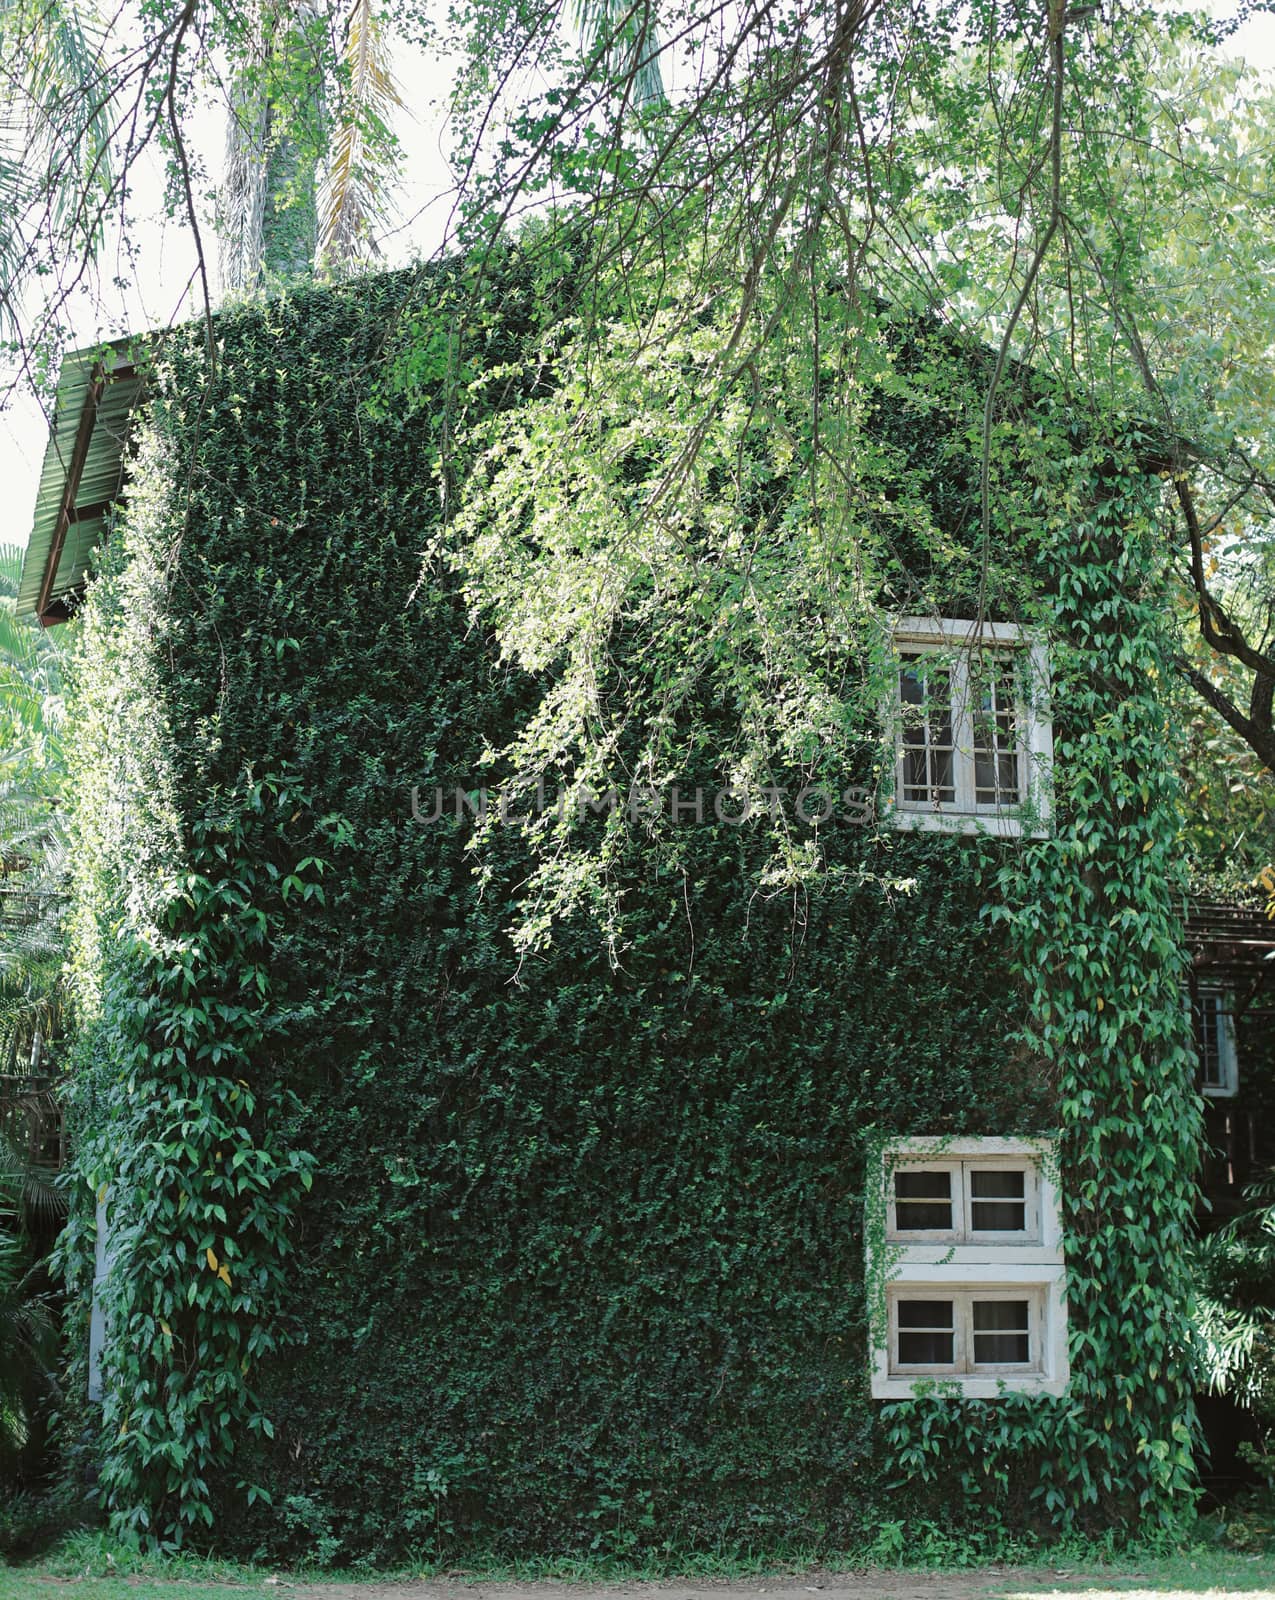 Old building house covered with green ivy plant, spring and natural concept 